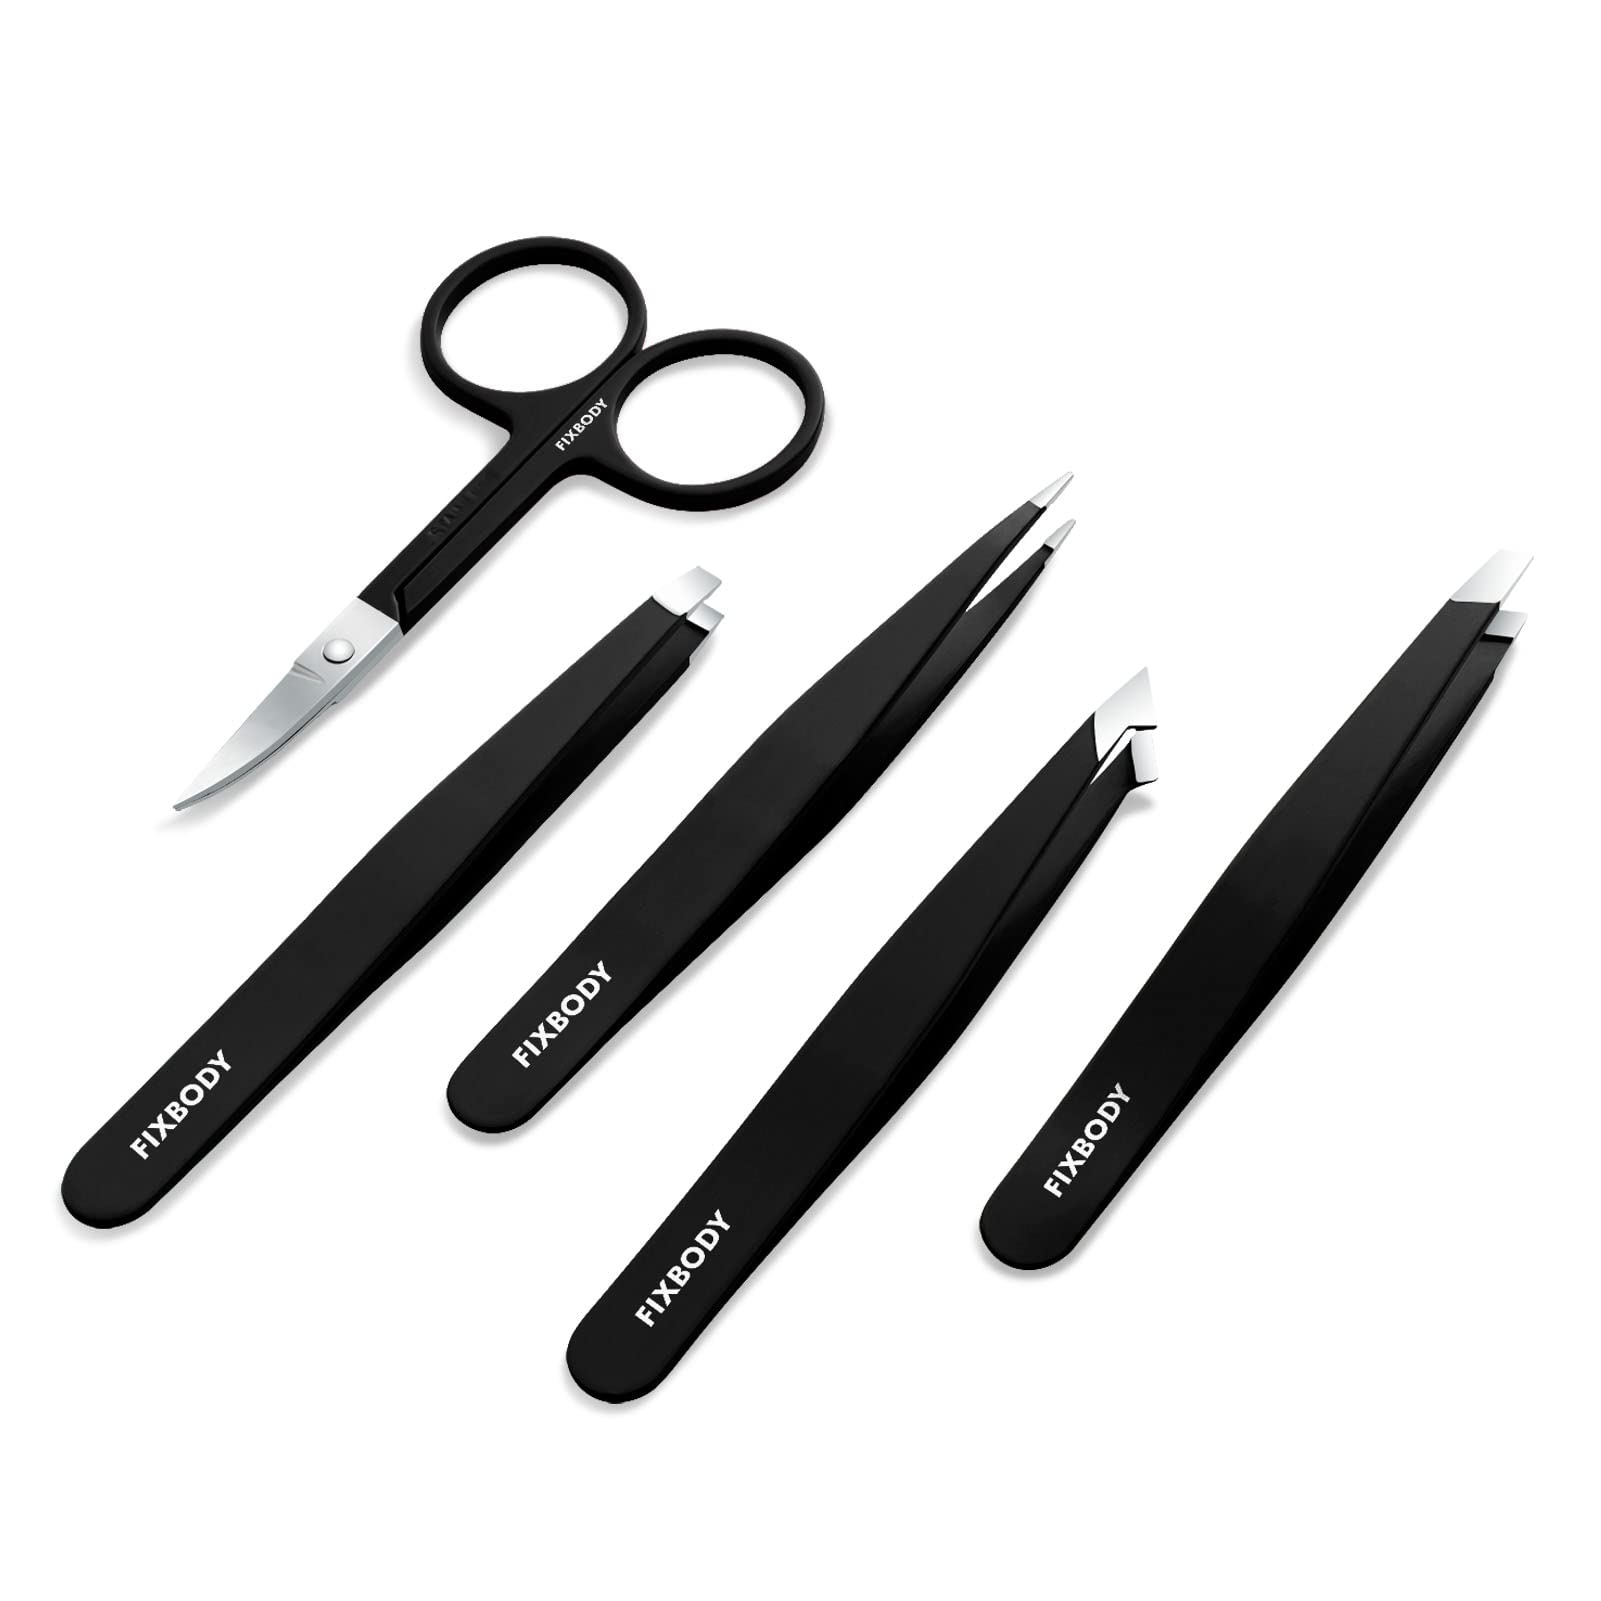 Pro-Curved Tweezers, Stainless Steel